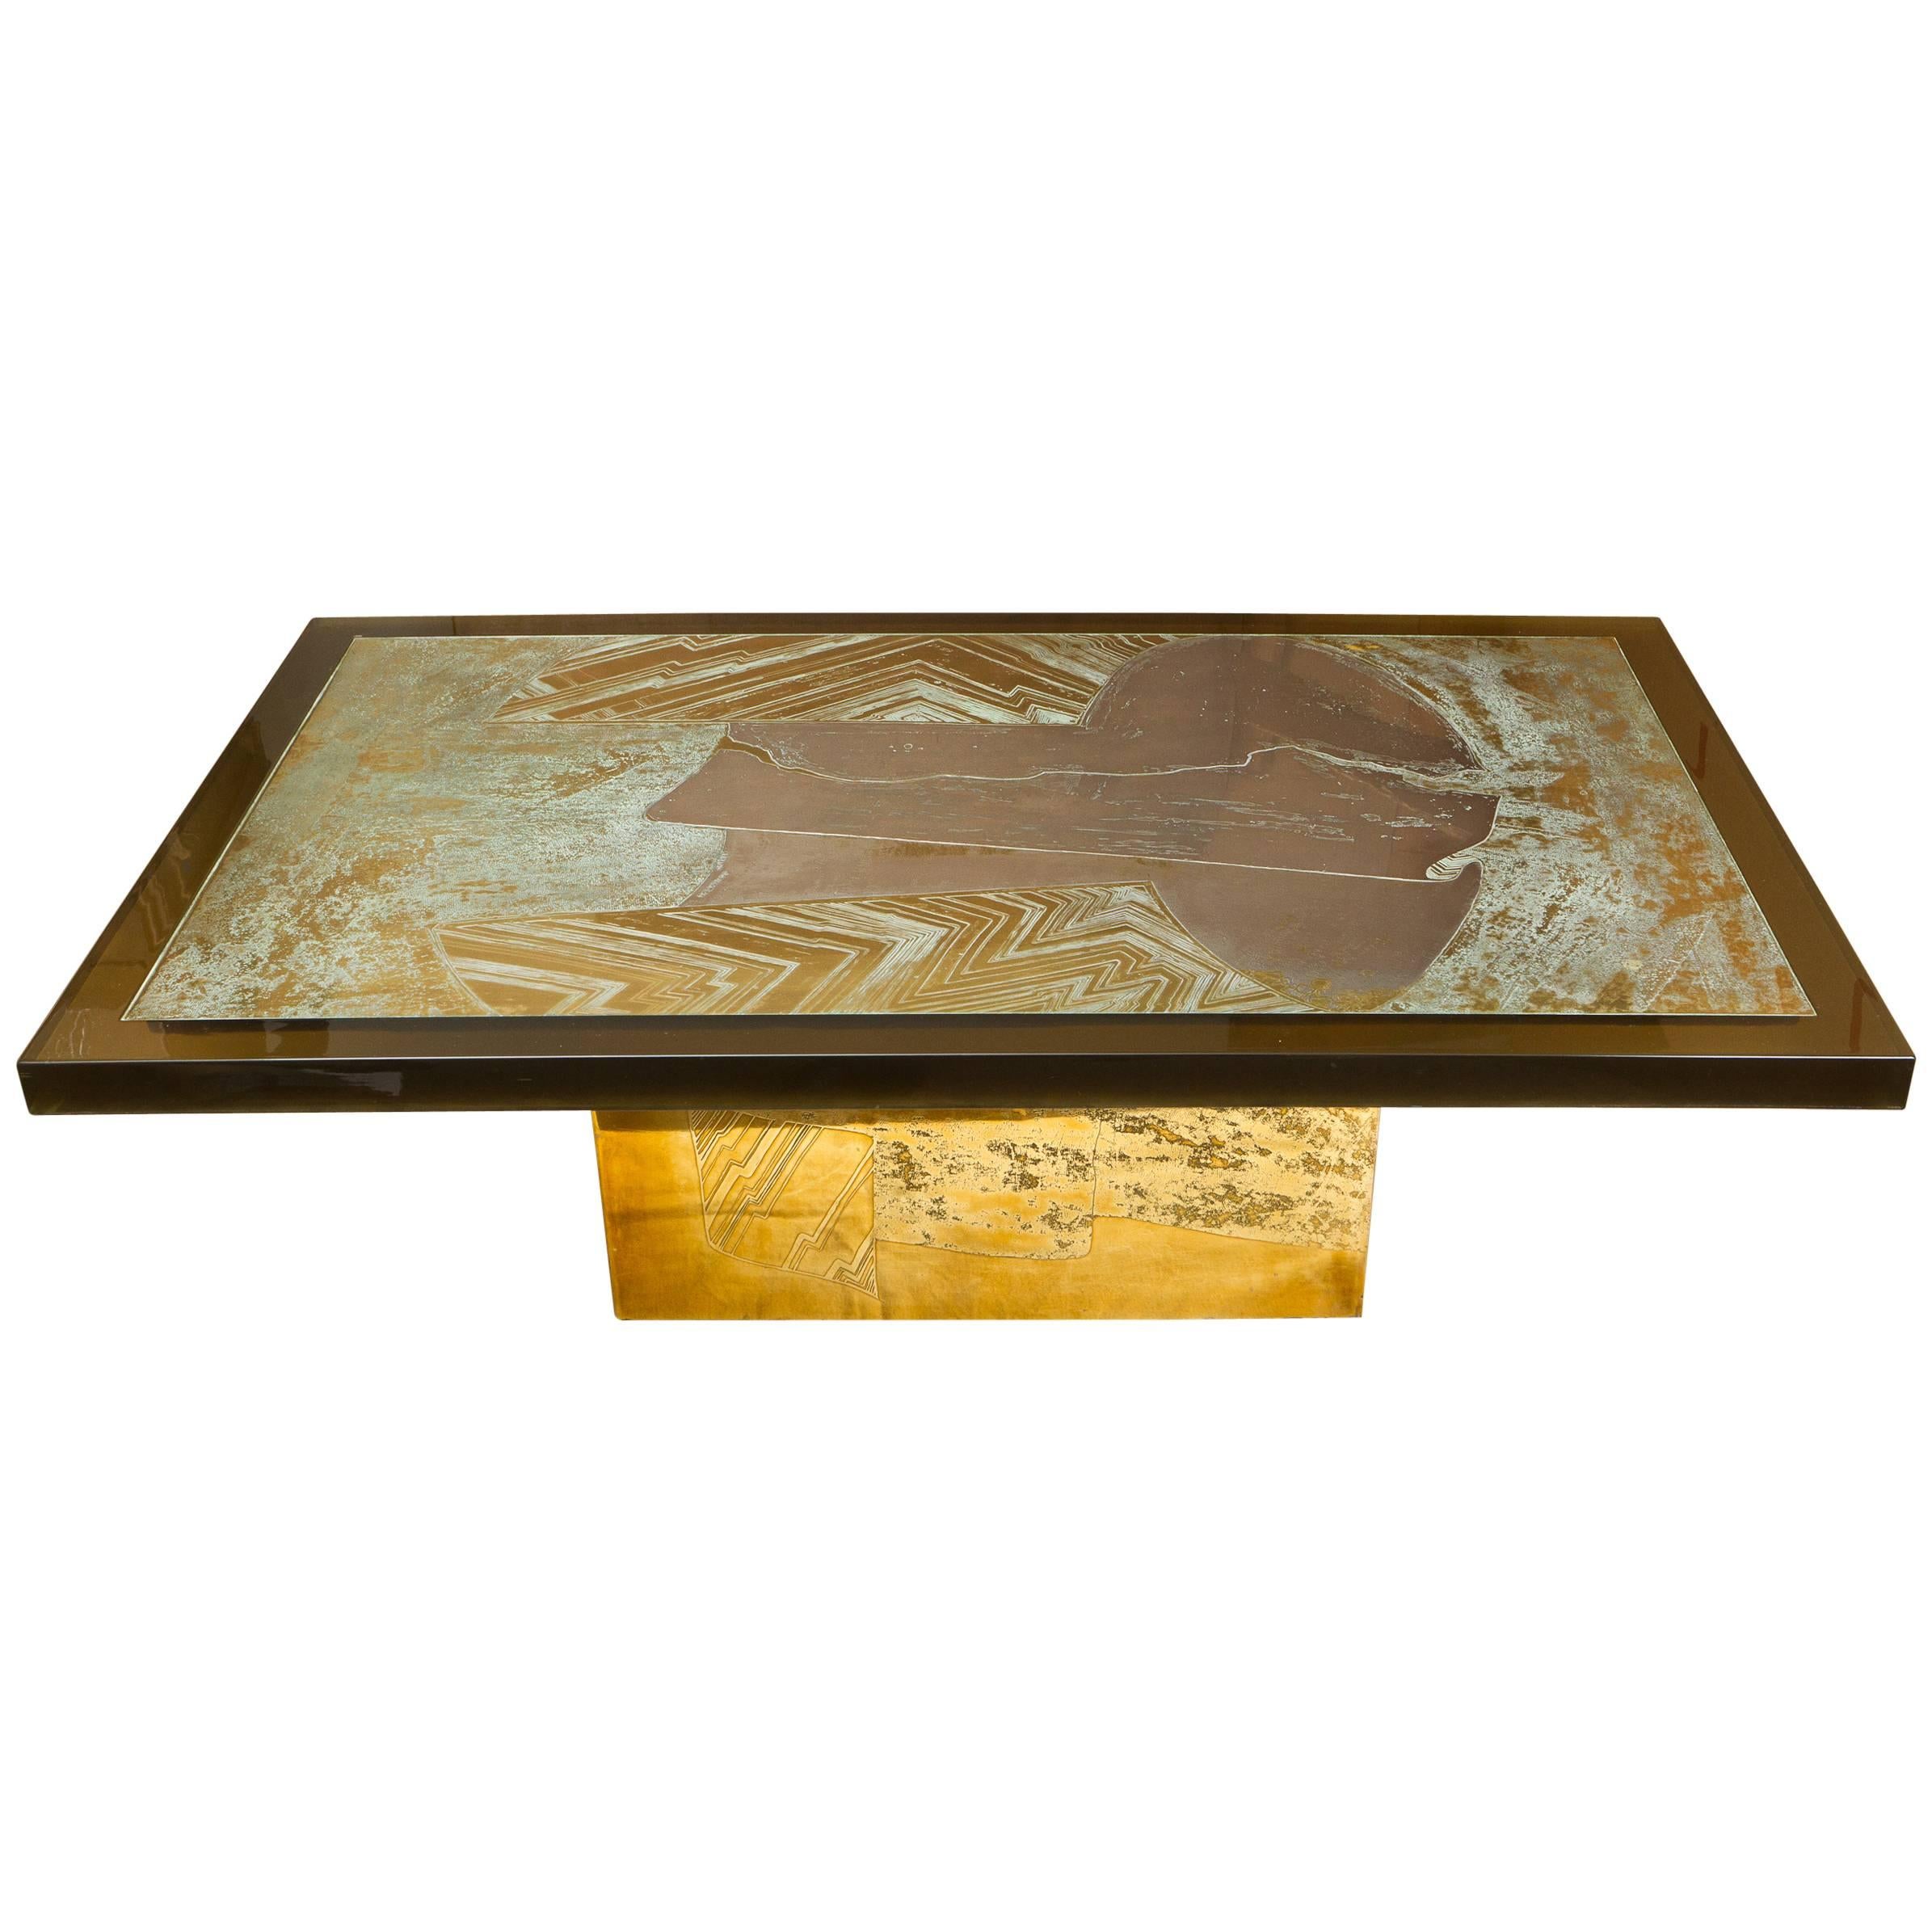 Stunning Acid Etched Brass Coffee Table "Abstraction" by Armand Jonckers For Sale